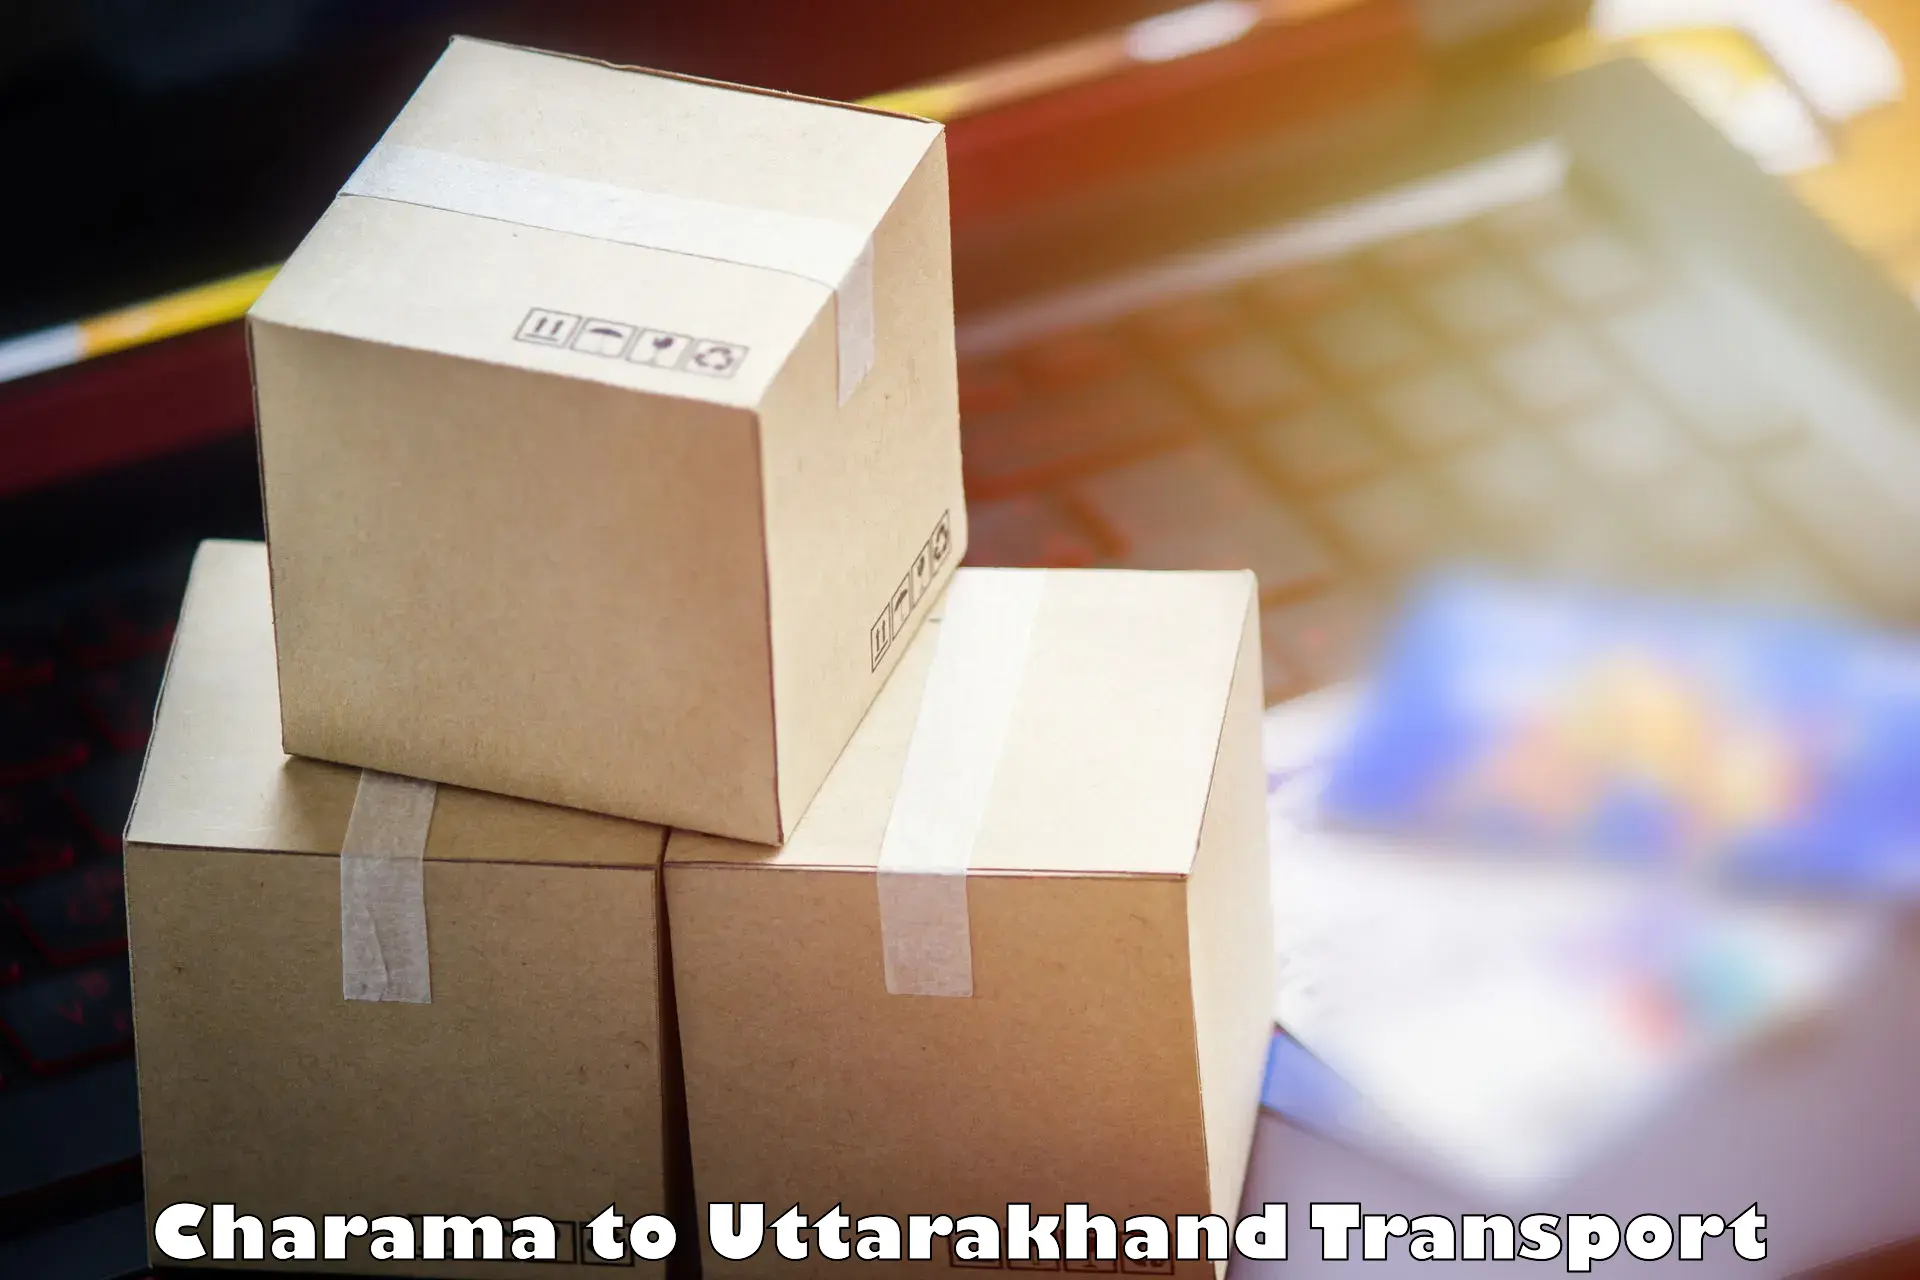 Goods delivery service Charama to Rishikesh